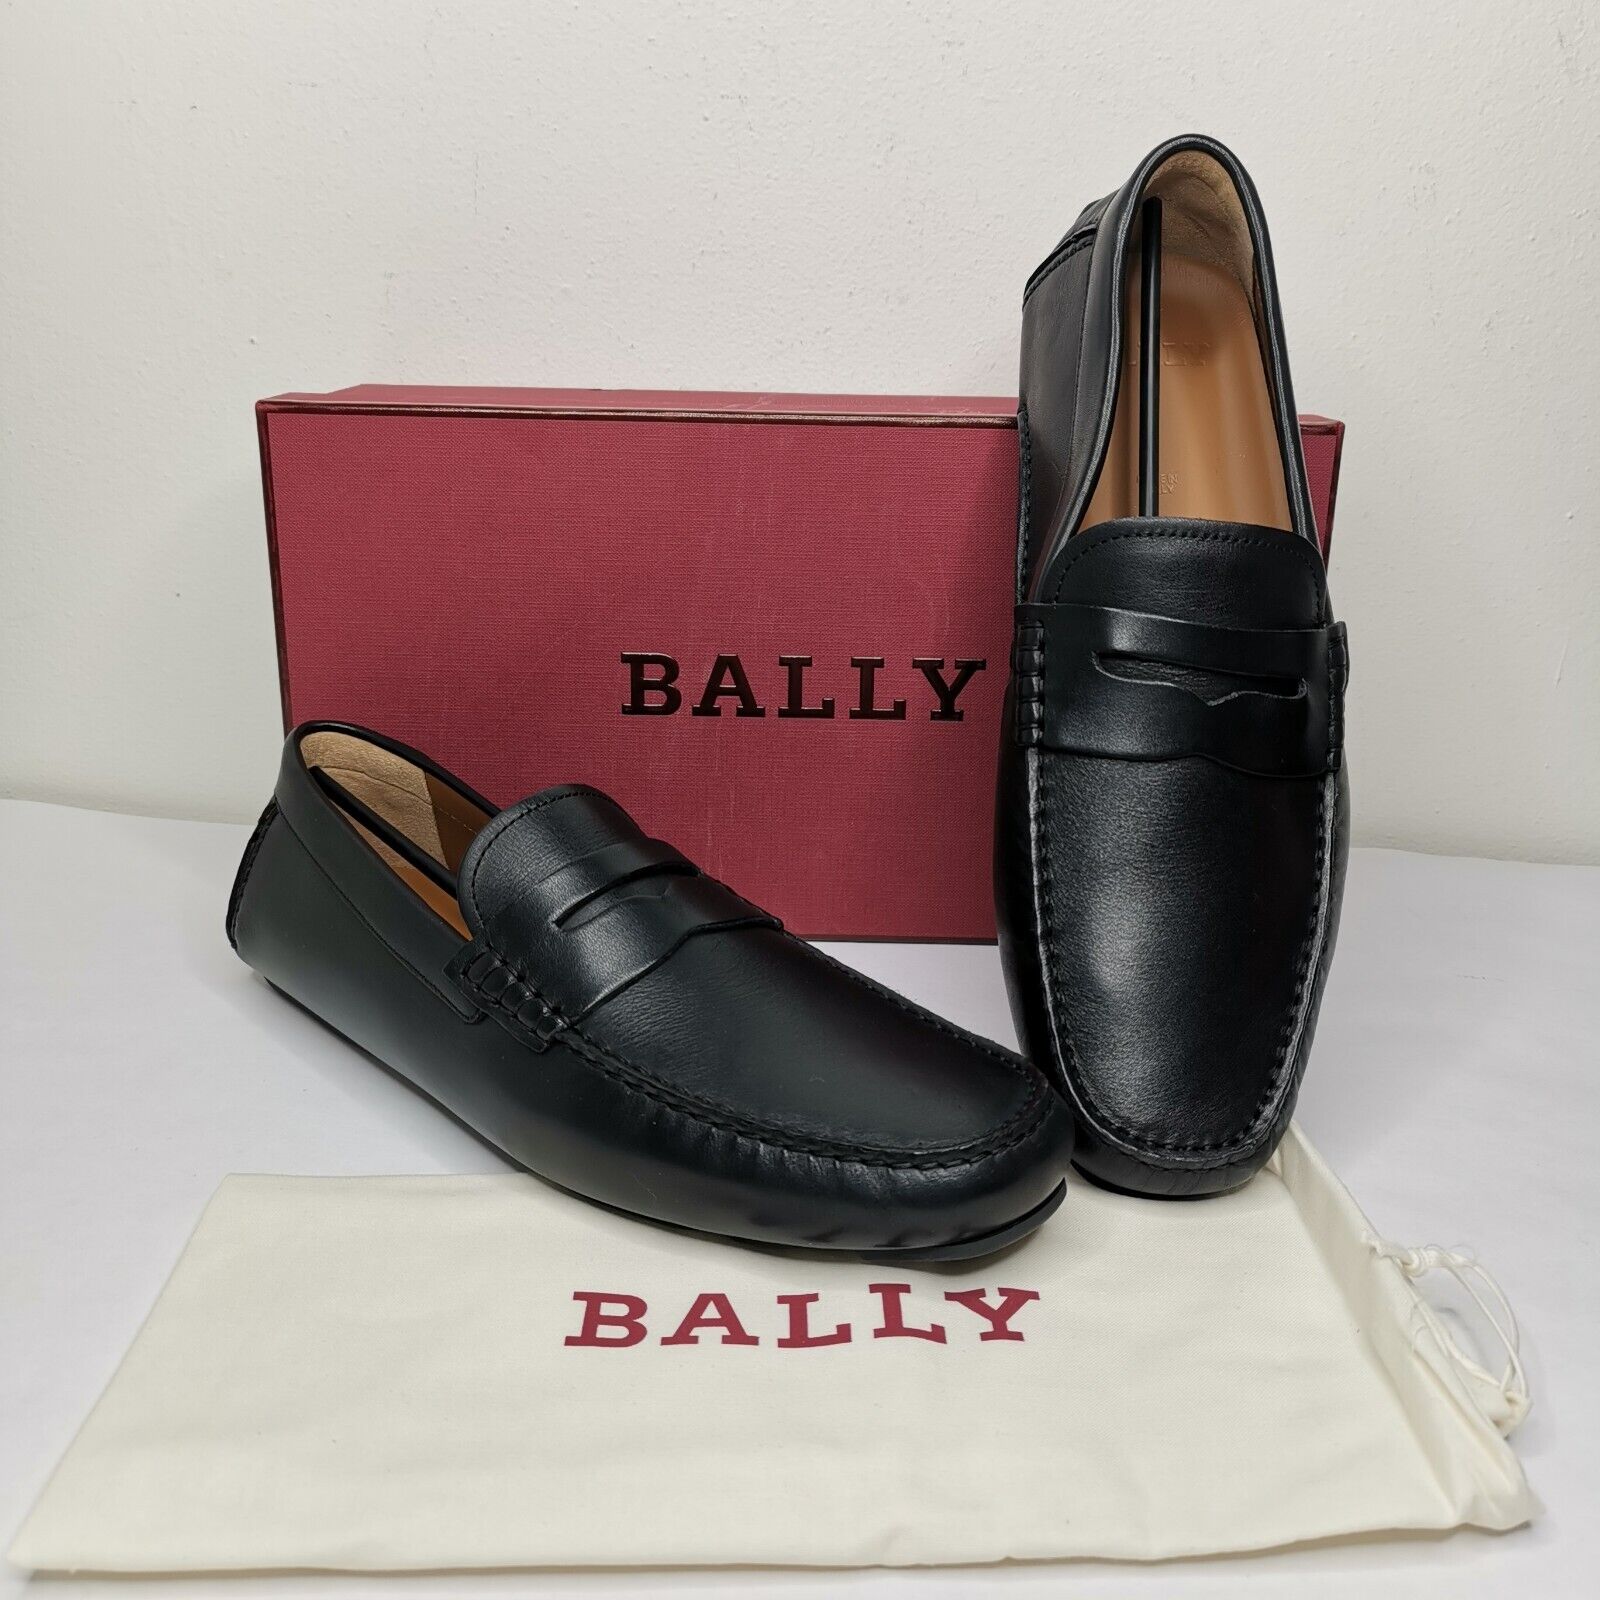 Bally Loafer Shoes Warno.o Driver Men's Choosing Size Italy New In Box